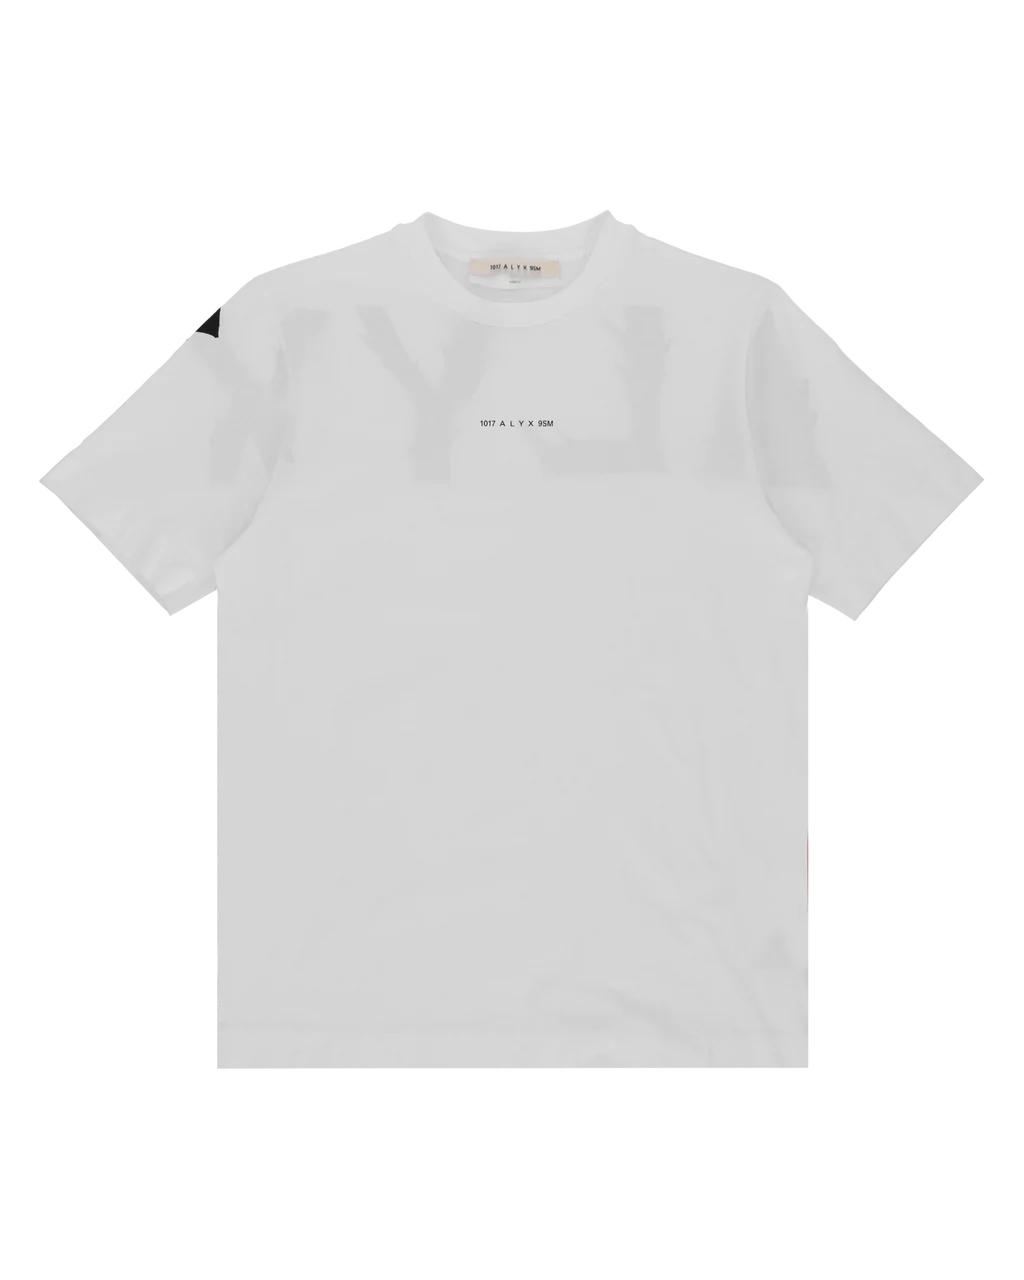 Alyx Men's Graphic S/S T-Shirt (White) by ALYX